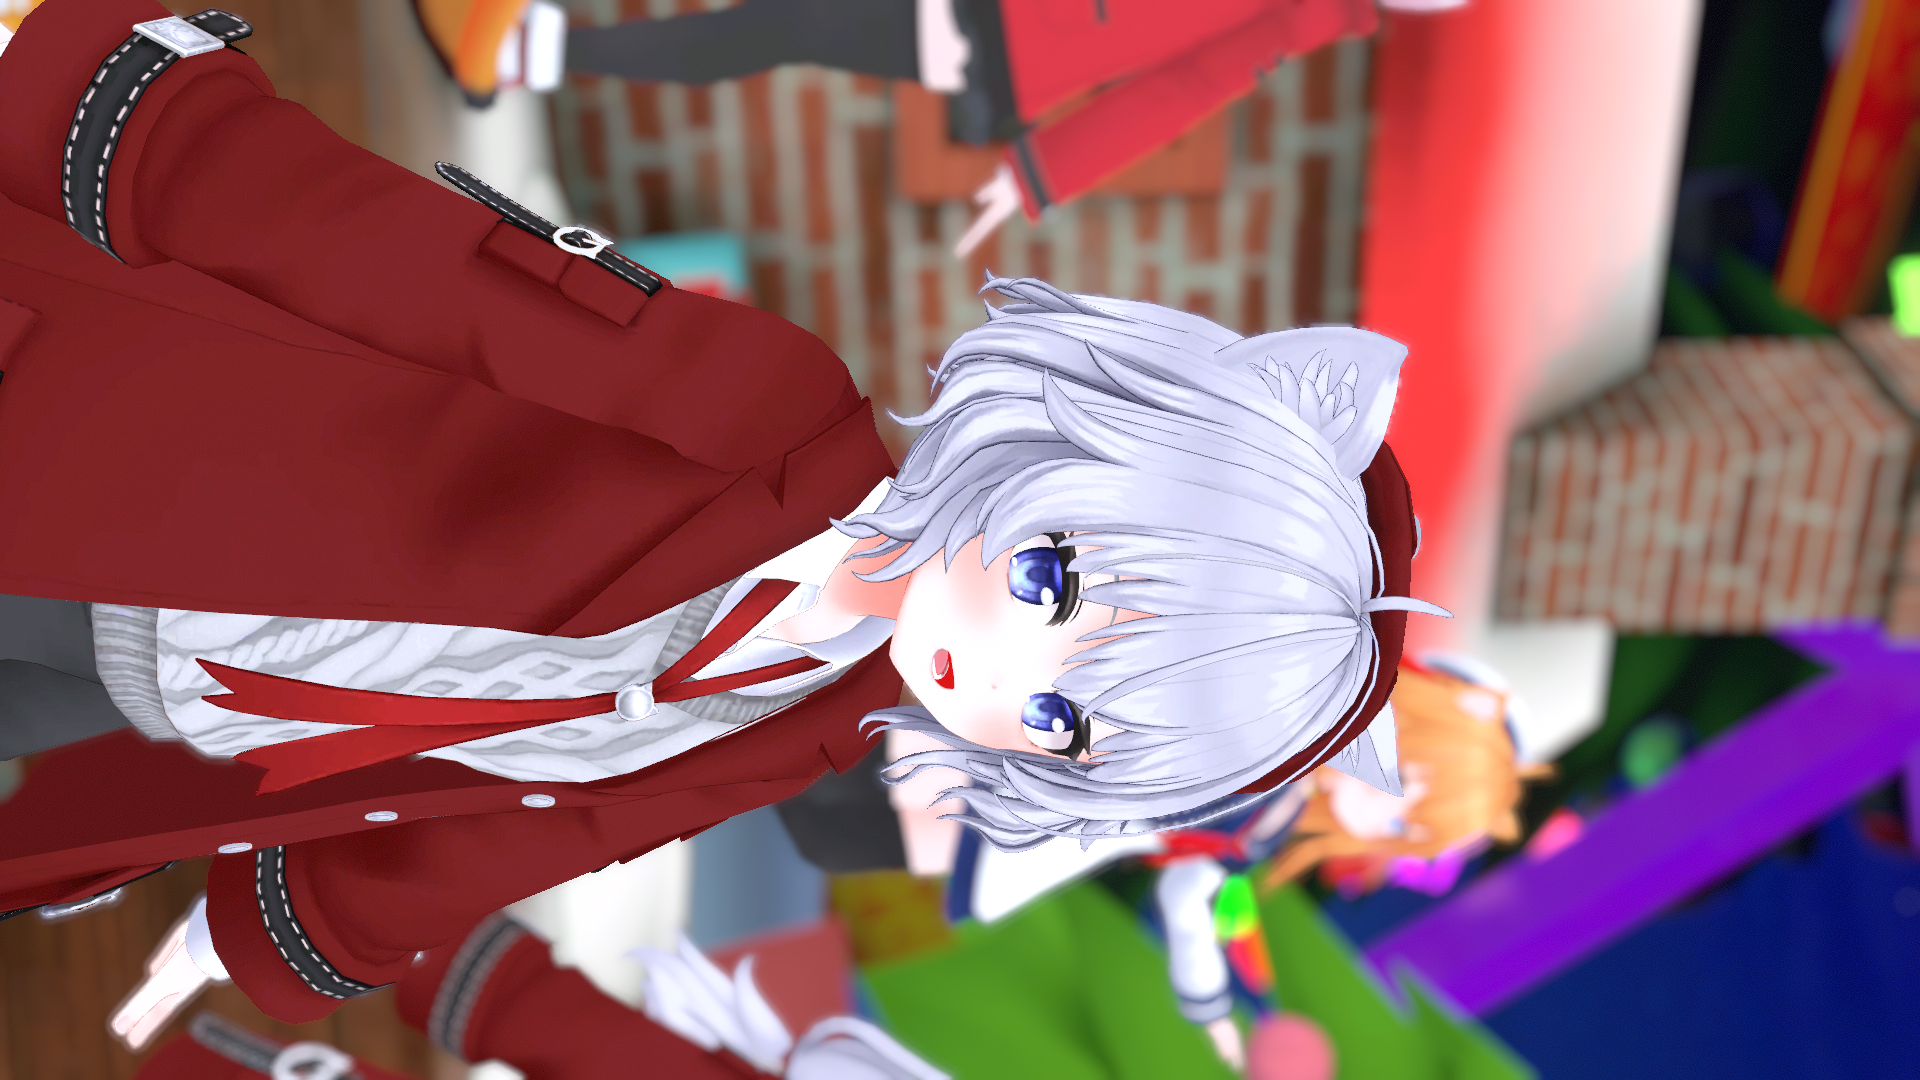 VRChat_1920x1080_2021-12-05_05-05-53.607.png